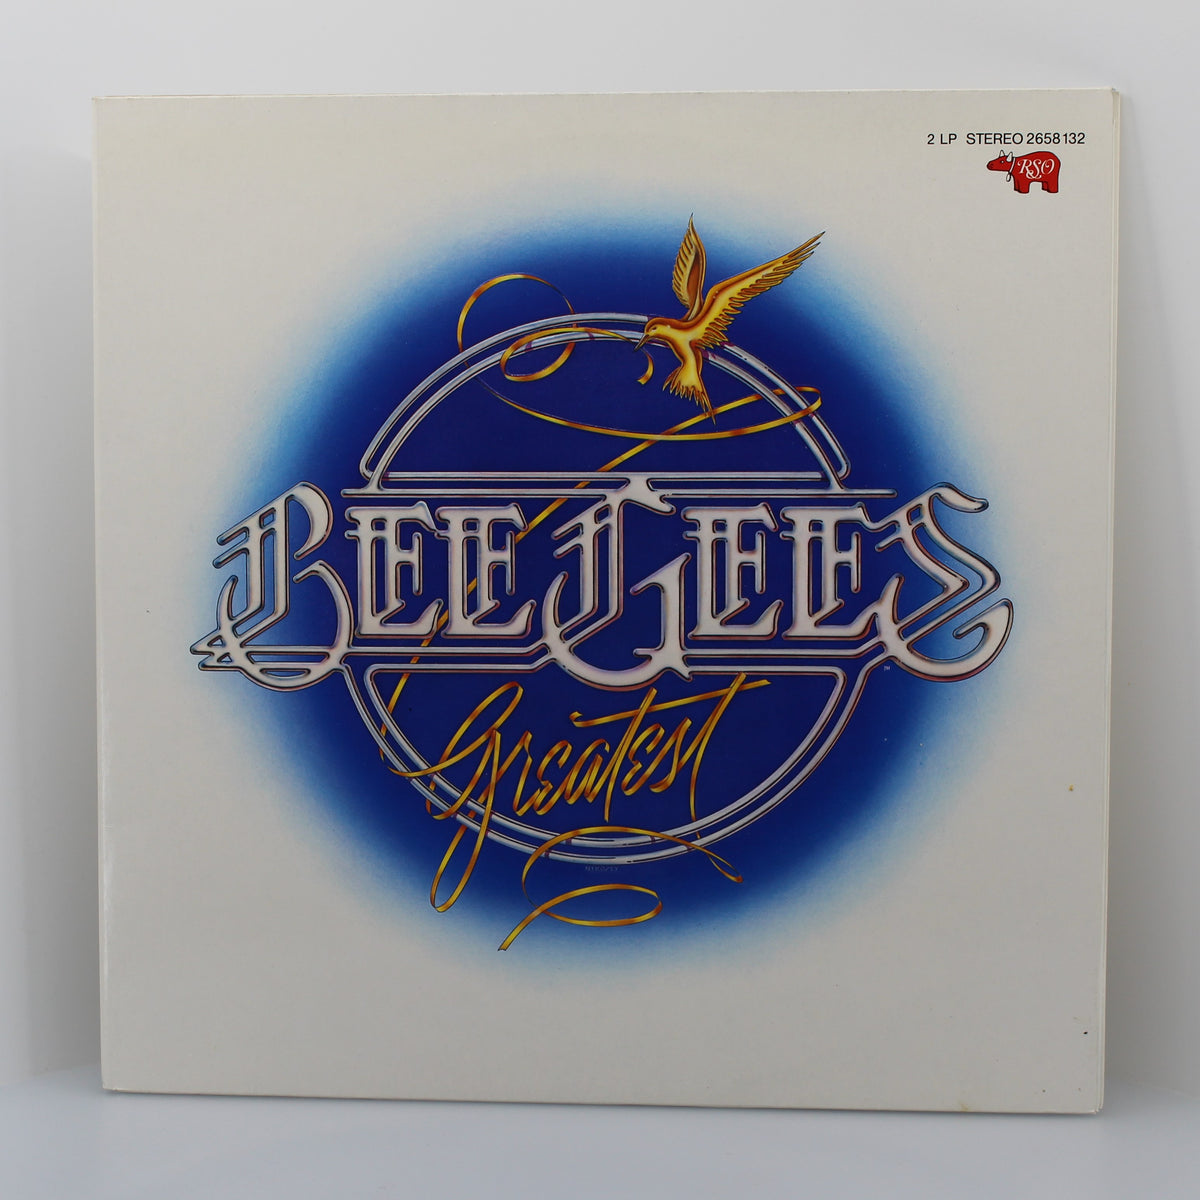 Bee Gees - Greatest, 2 x Vinyl, LP, Compilation, Embossed - Triple Cover, Netherlands 1979